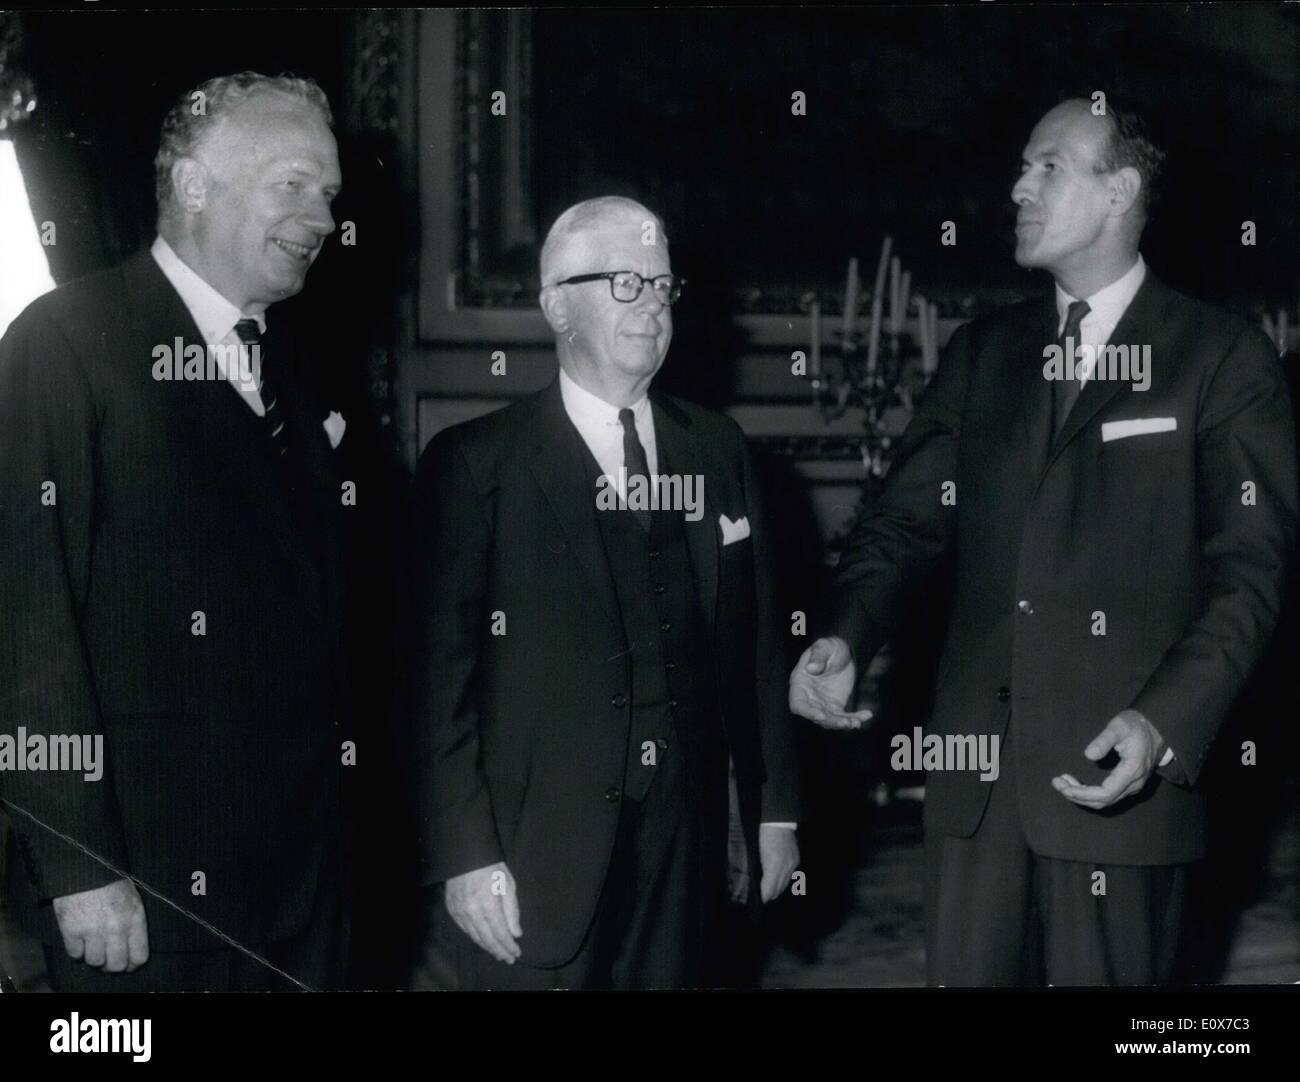 Aug. 30, 1965 - Fowler, the US Treasury Secretary accompanied by Ball (US Foreign Affairs Under-Secretary), met with Giscard d'Estaing, France's Minister of Finances in Paris today. Stock Photo